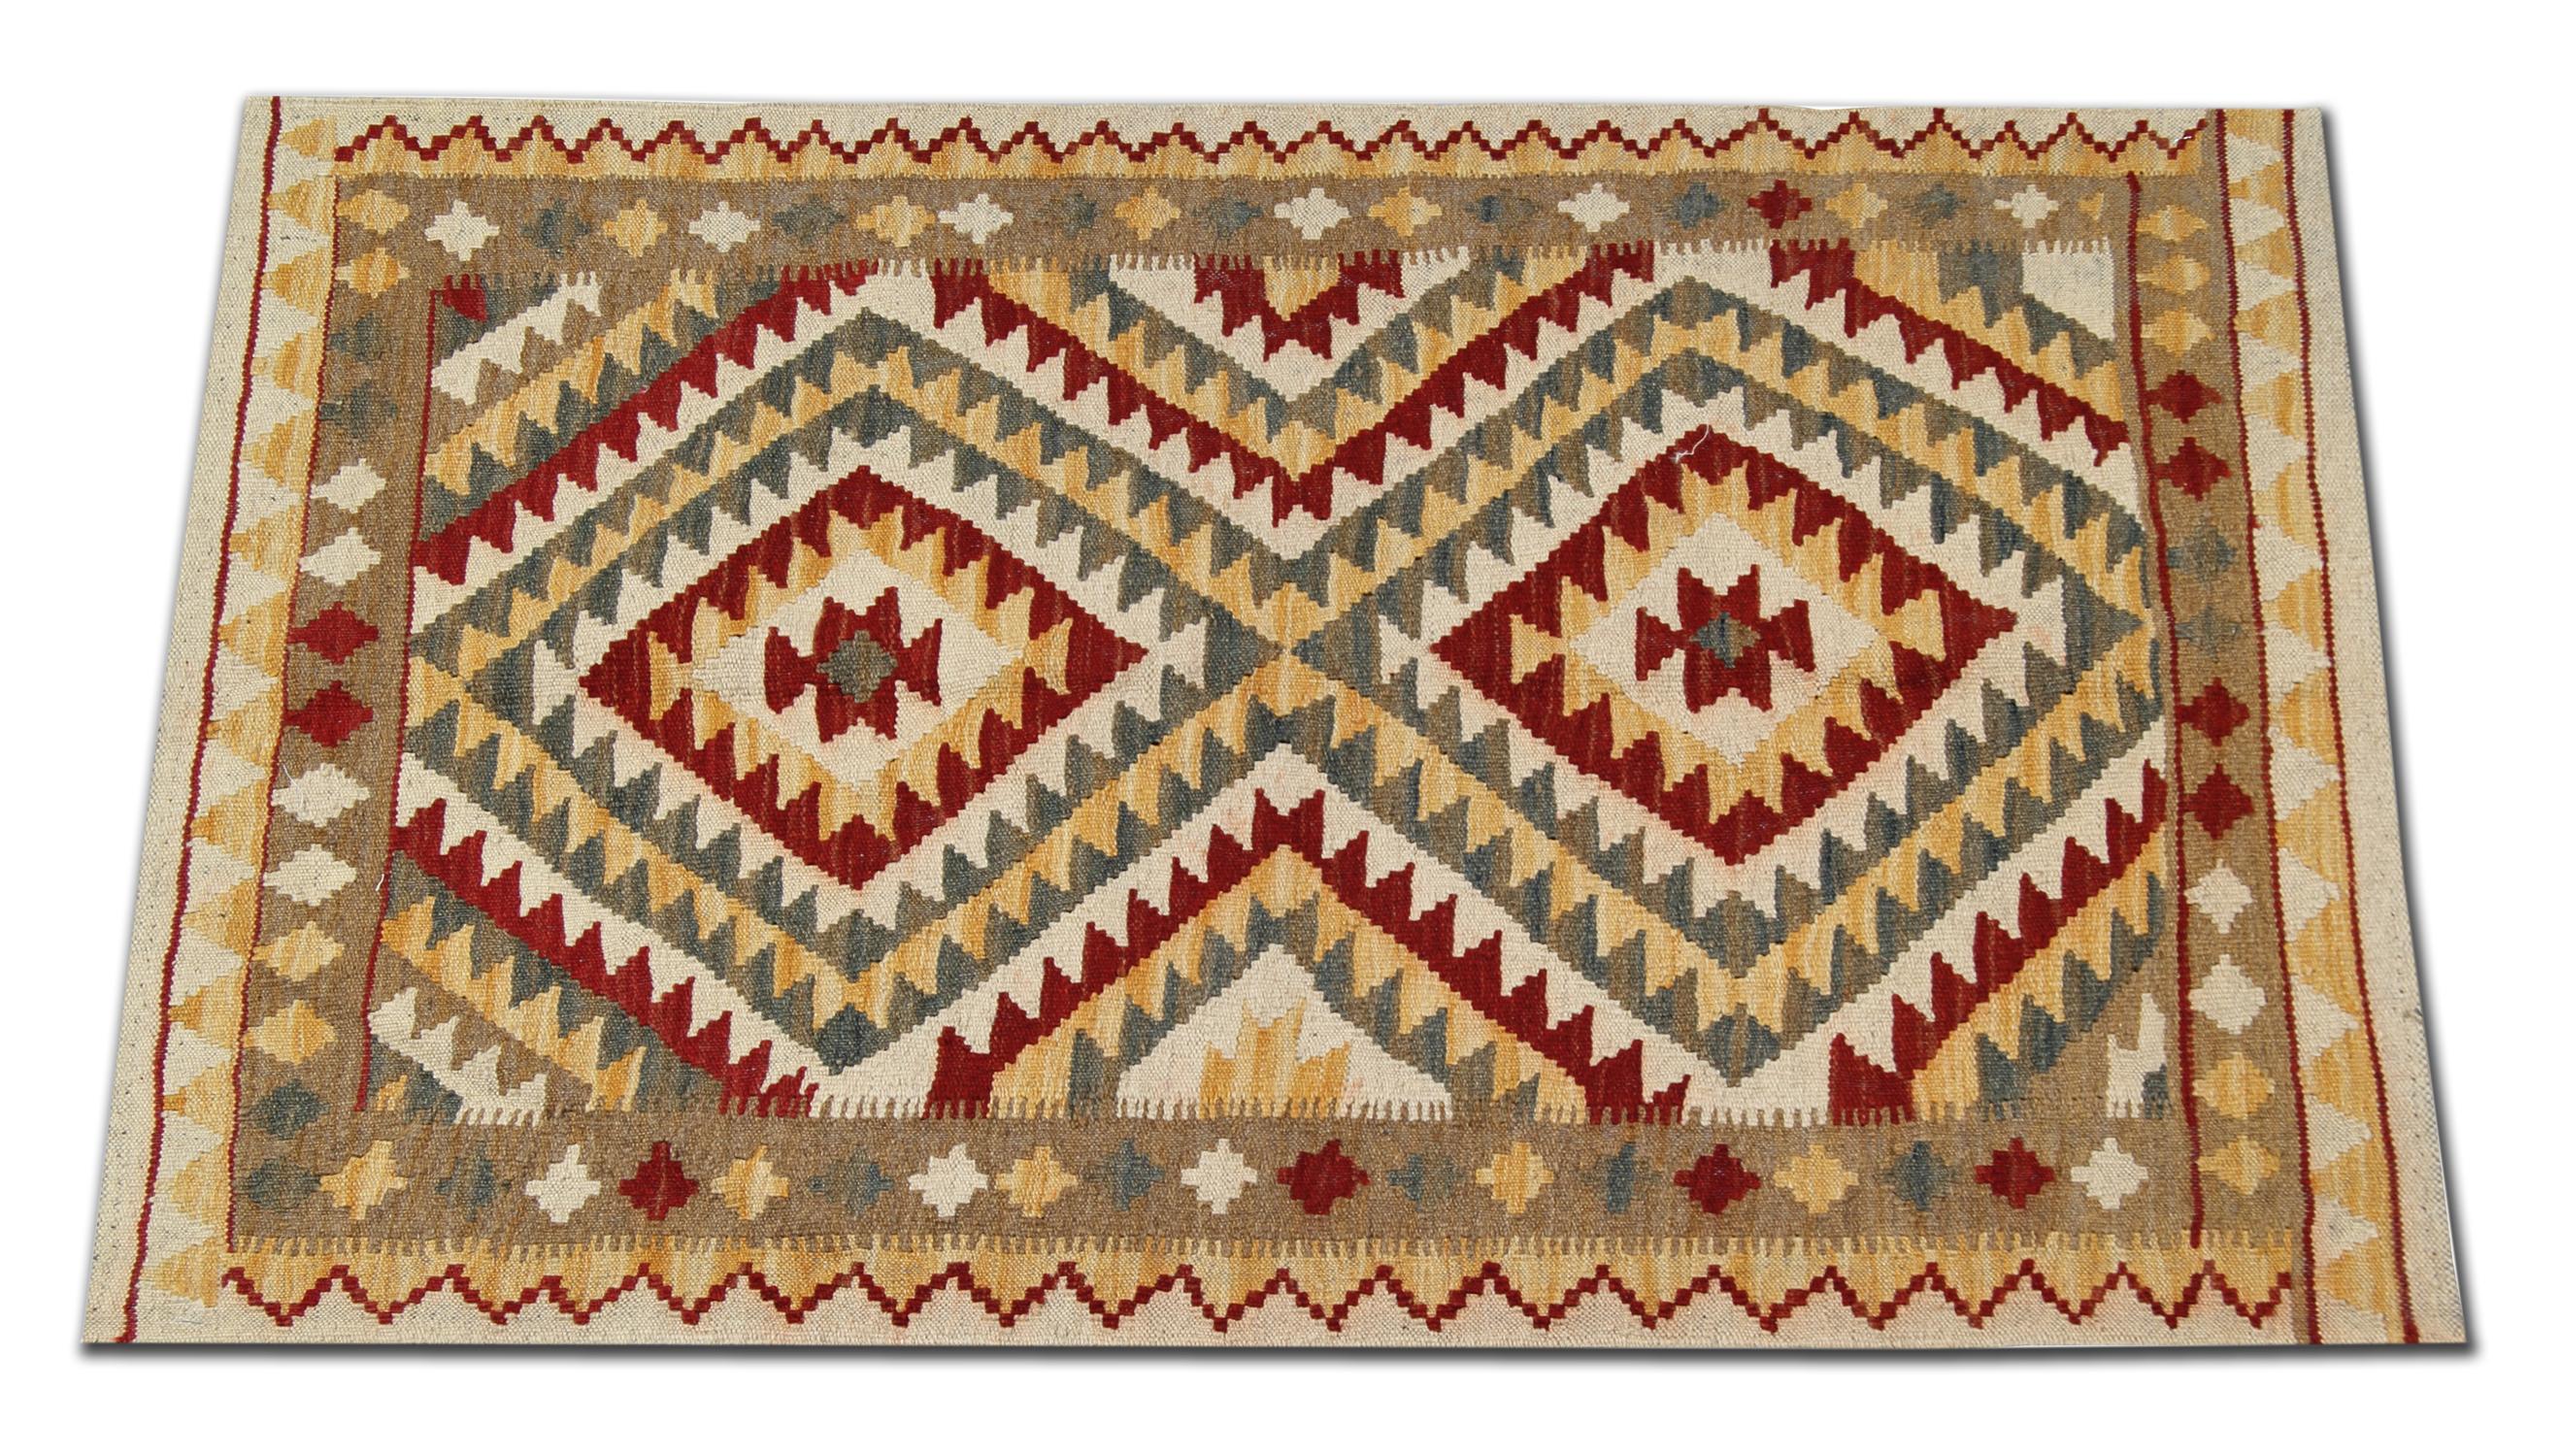 This fine wool rug is a handwoven vintage Kilim woven in Afghanistan in the 1990s. The central design features a simple rustic stripe design woven win yellow, red, green and beige accent colours. Bold and beautiful this wool rug is sure to make the